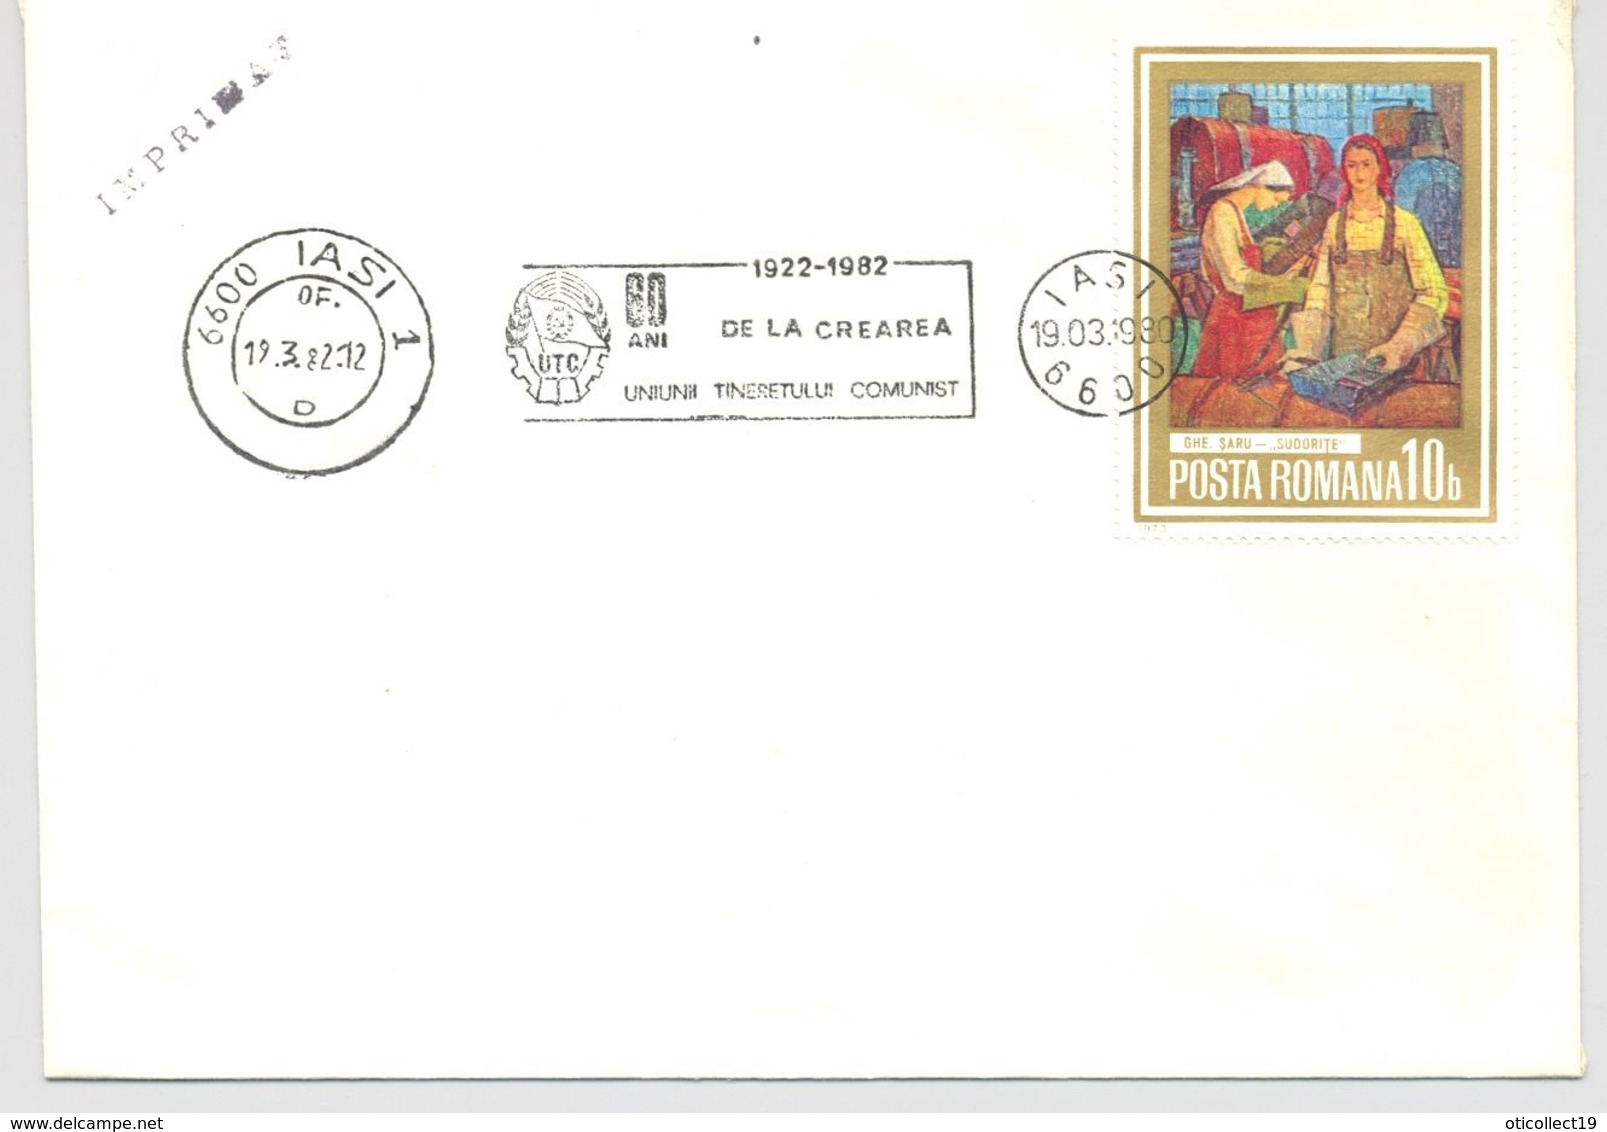 ROMANIAN YOUTH COMMUNIST ORGANIZATION ANNIVERSARY, SPECIAL POSTMARK ON COVER, PAINTING STAMP, 1982, ROMANIA - Lettres & Documents